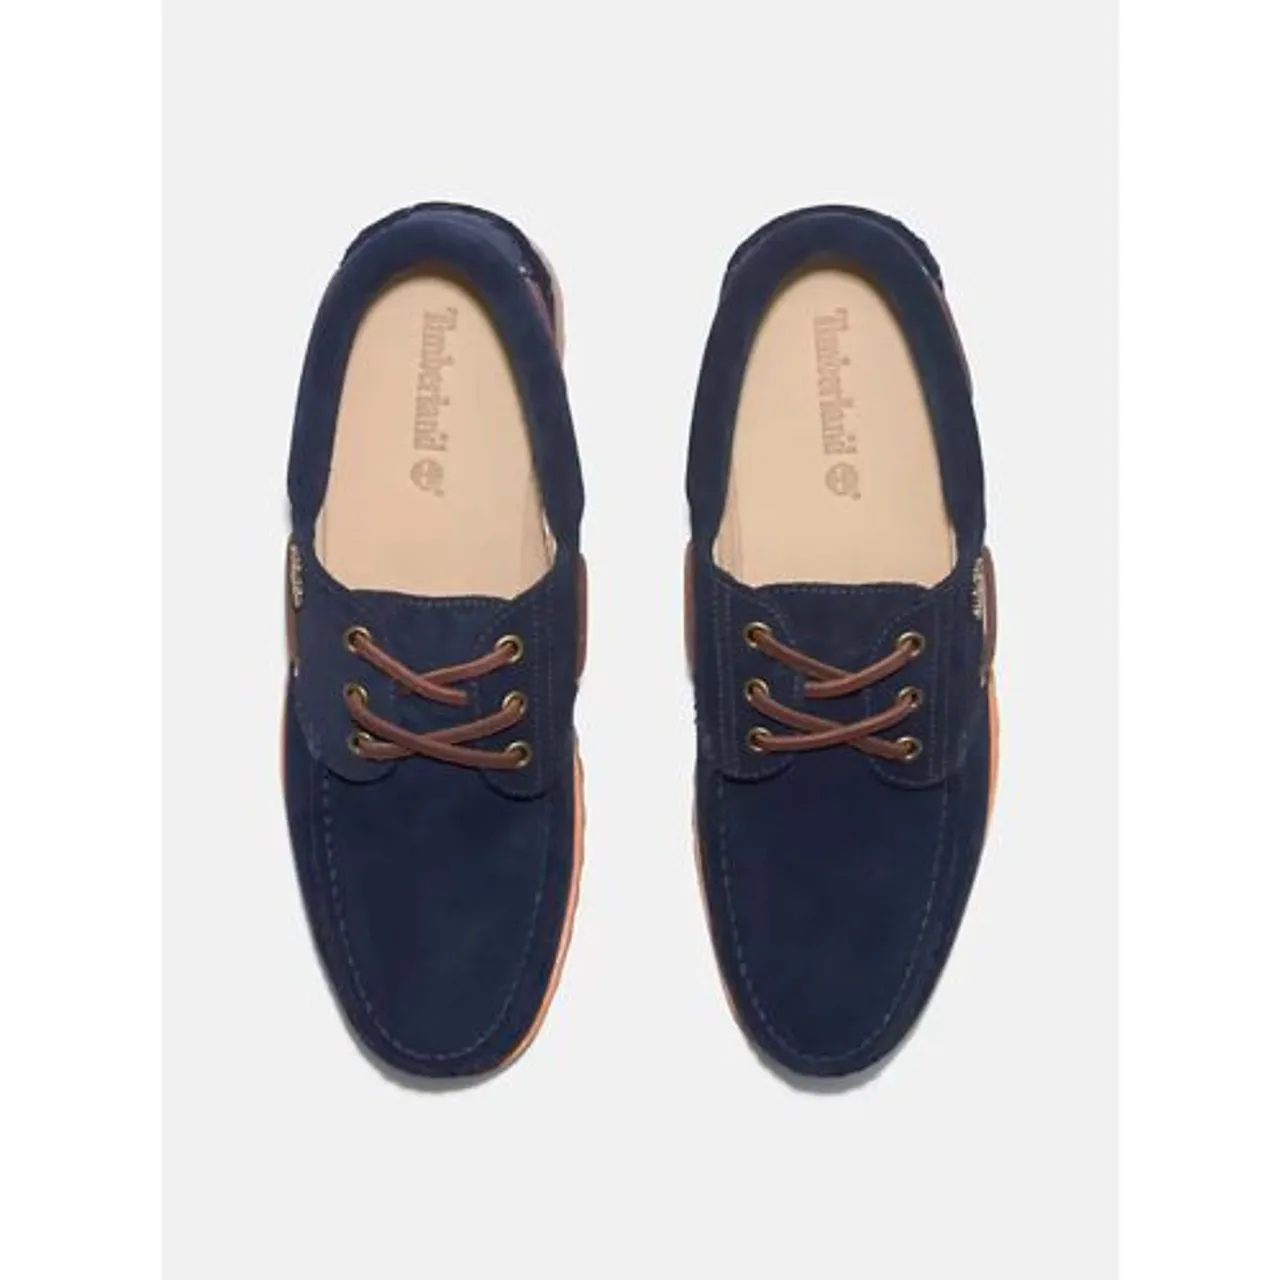 Timberland Mens Dark Blue Suede Authentic Boat Shoe